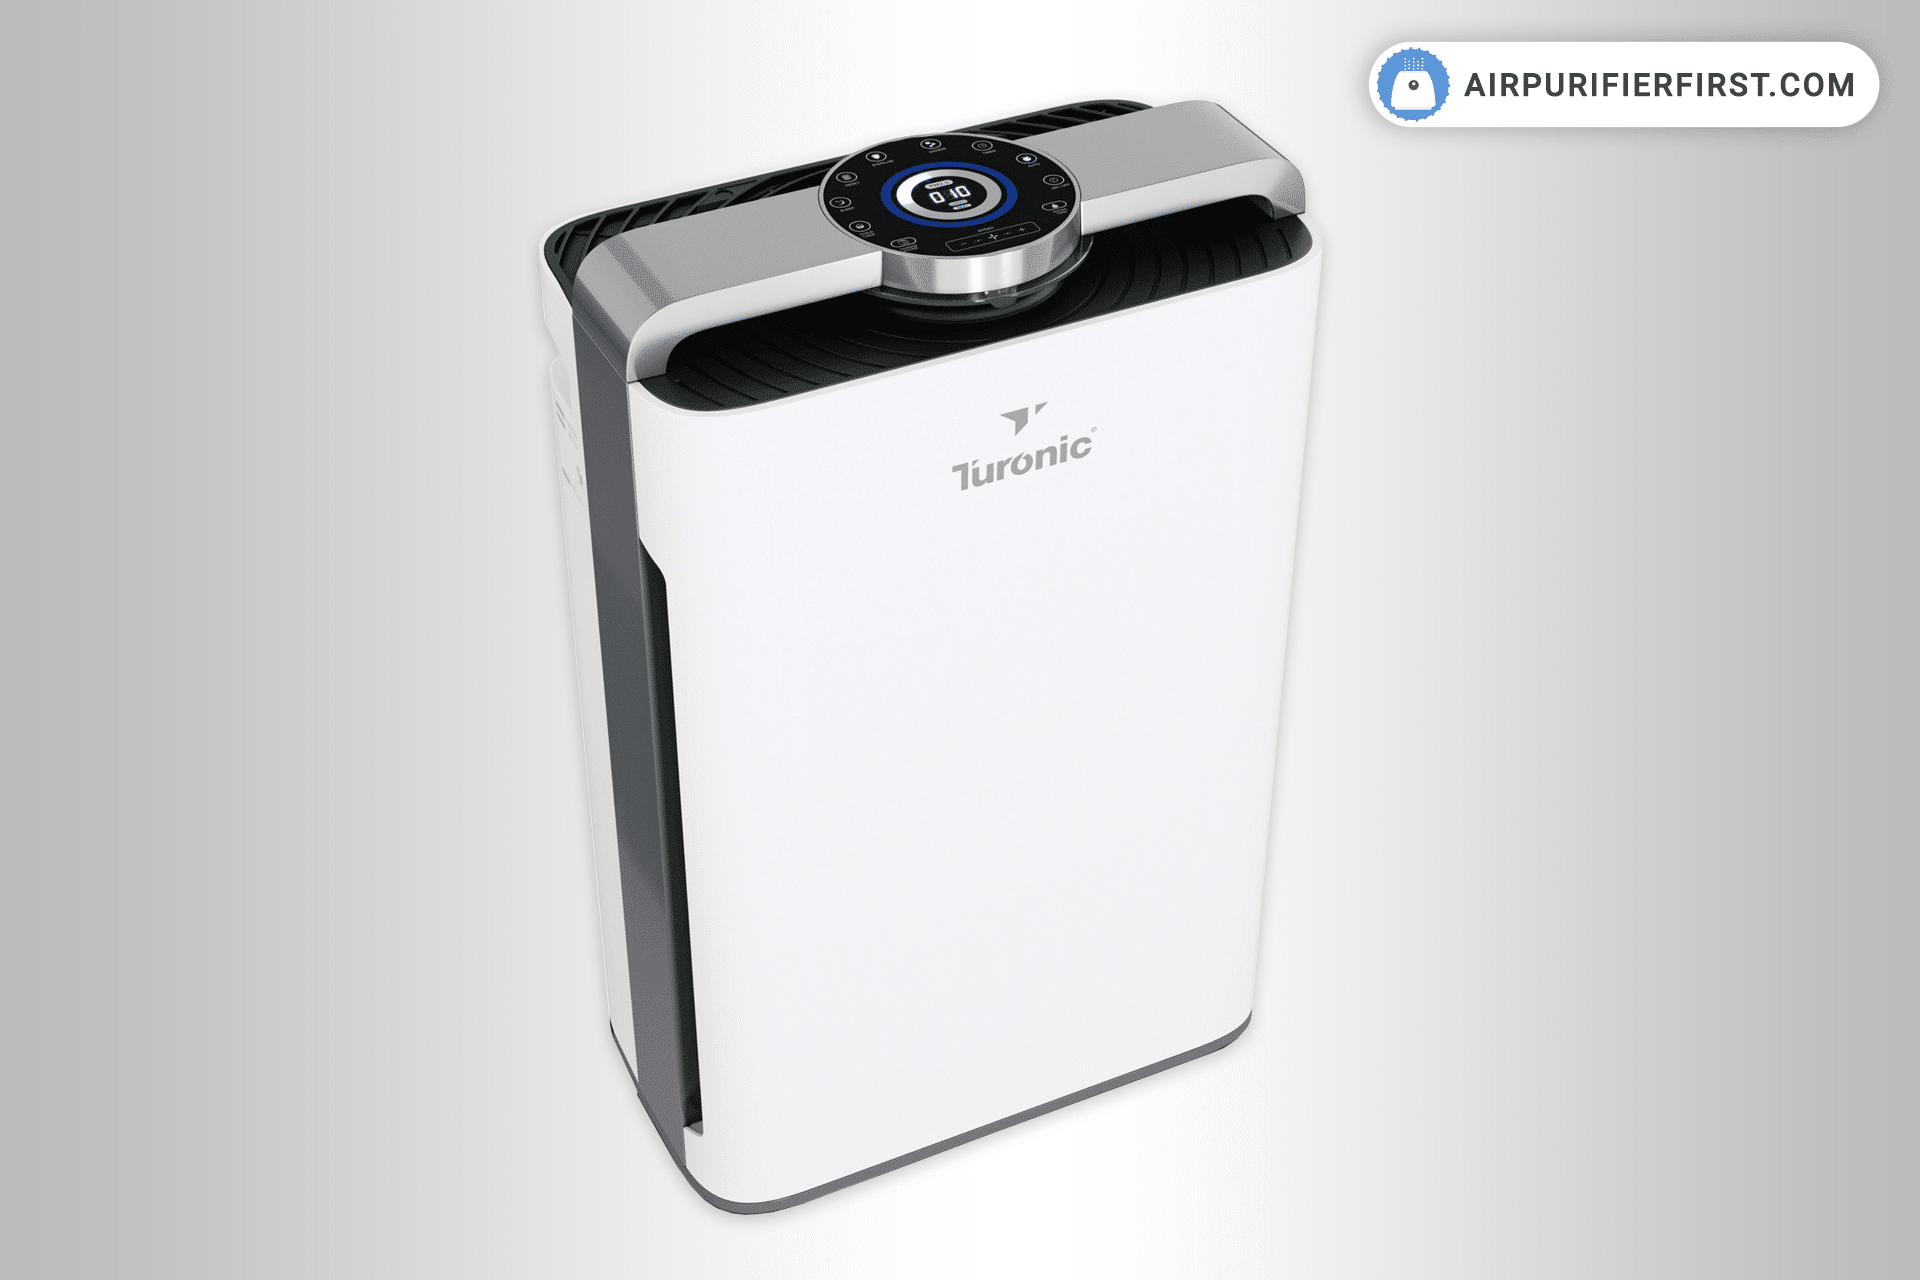 Turonic PH950 Air Purifier and Humidifier Combo - Review